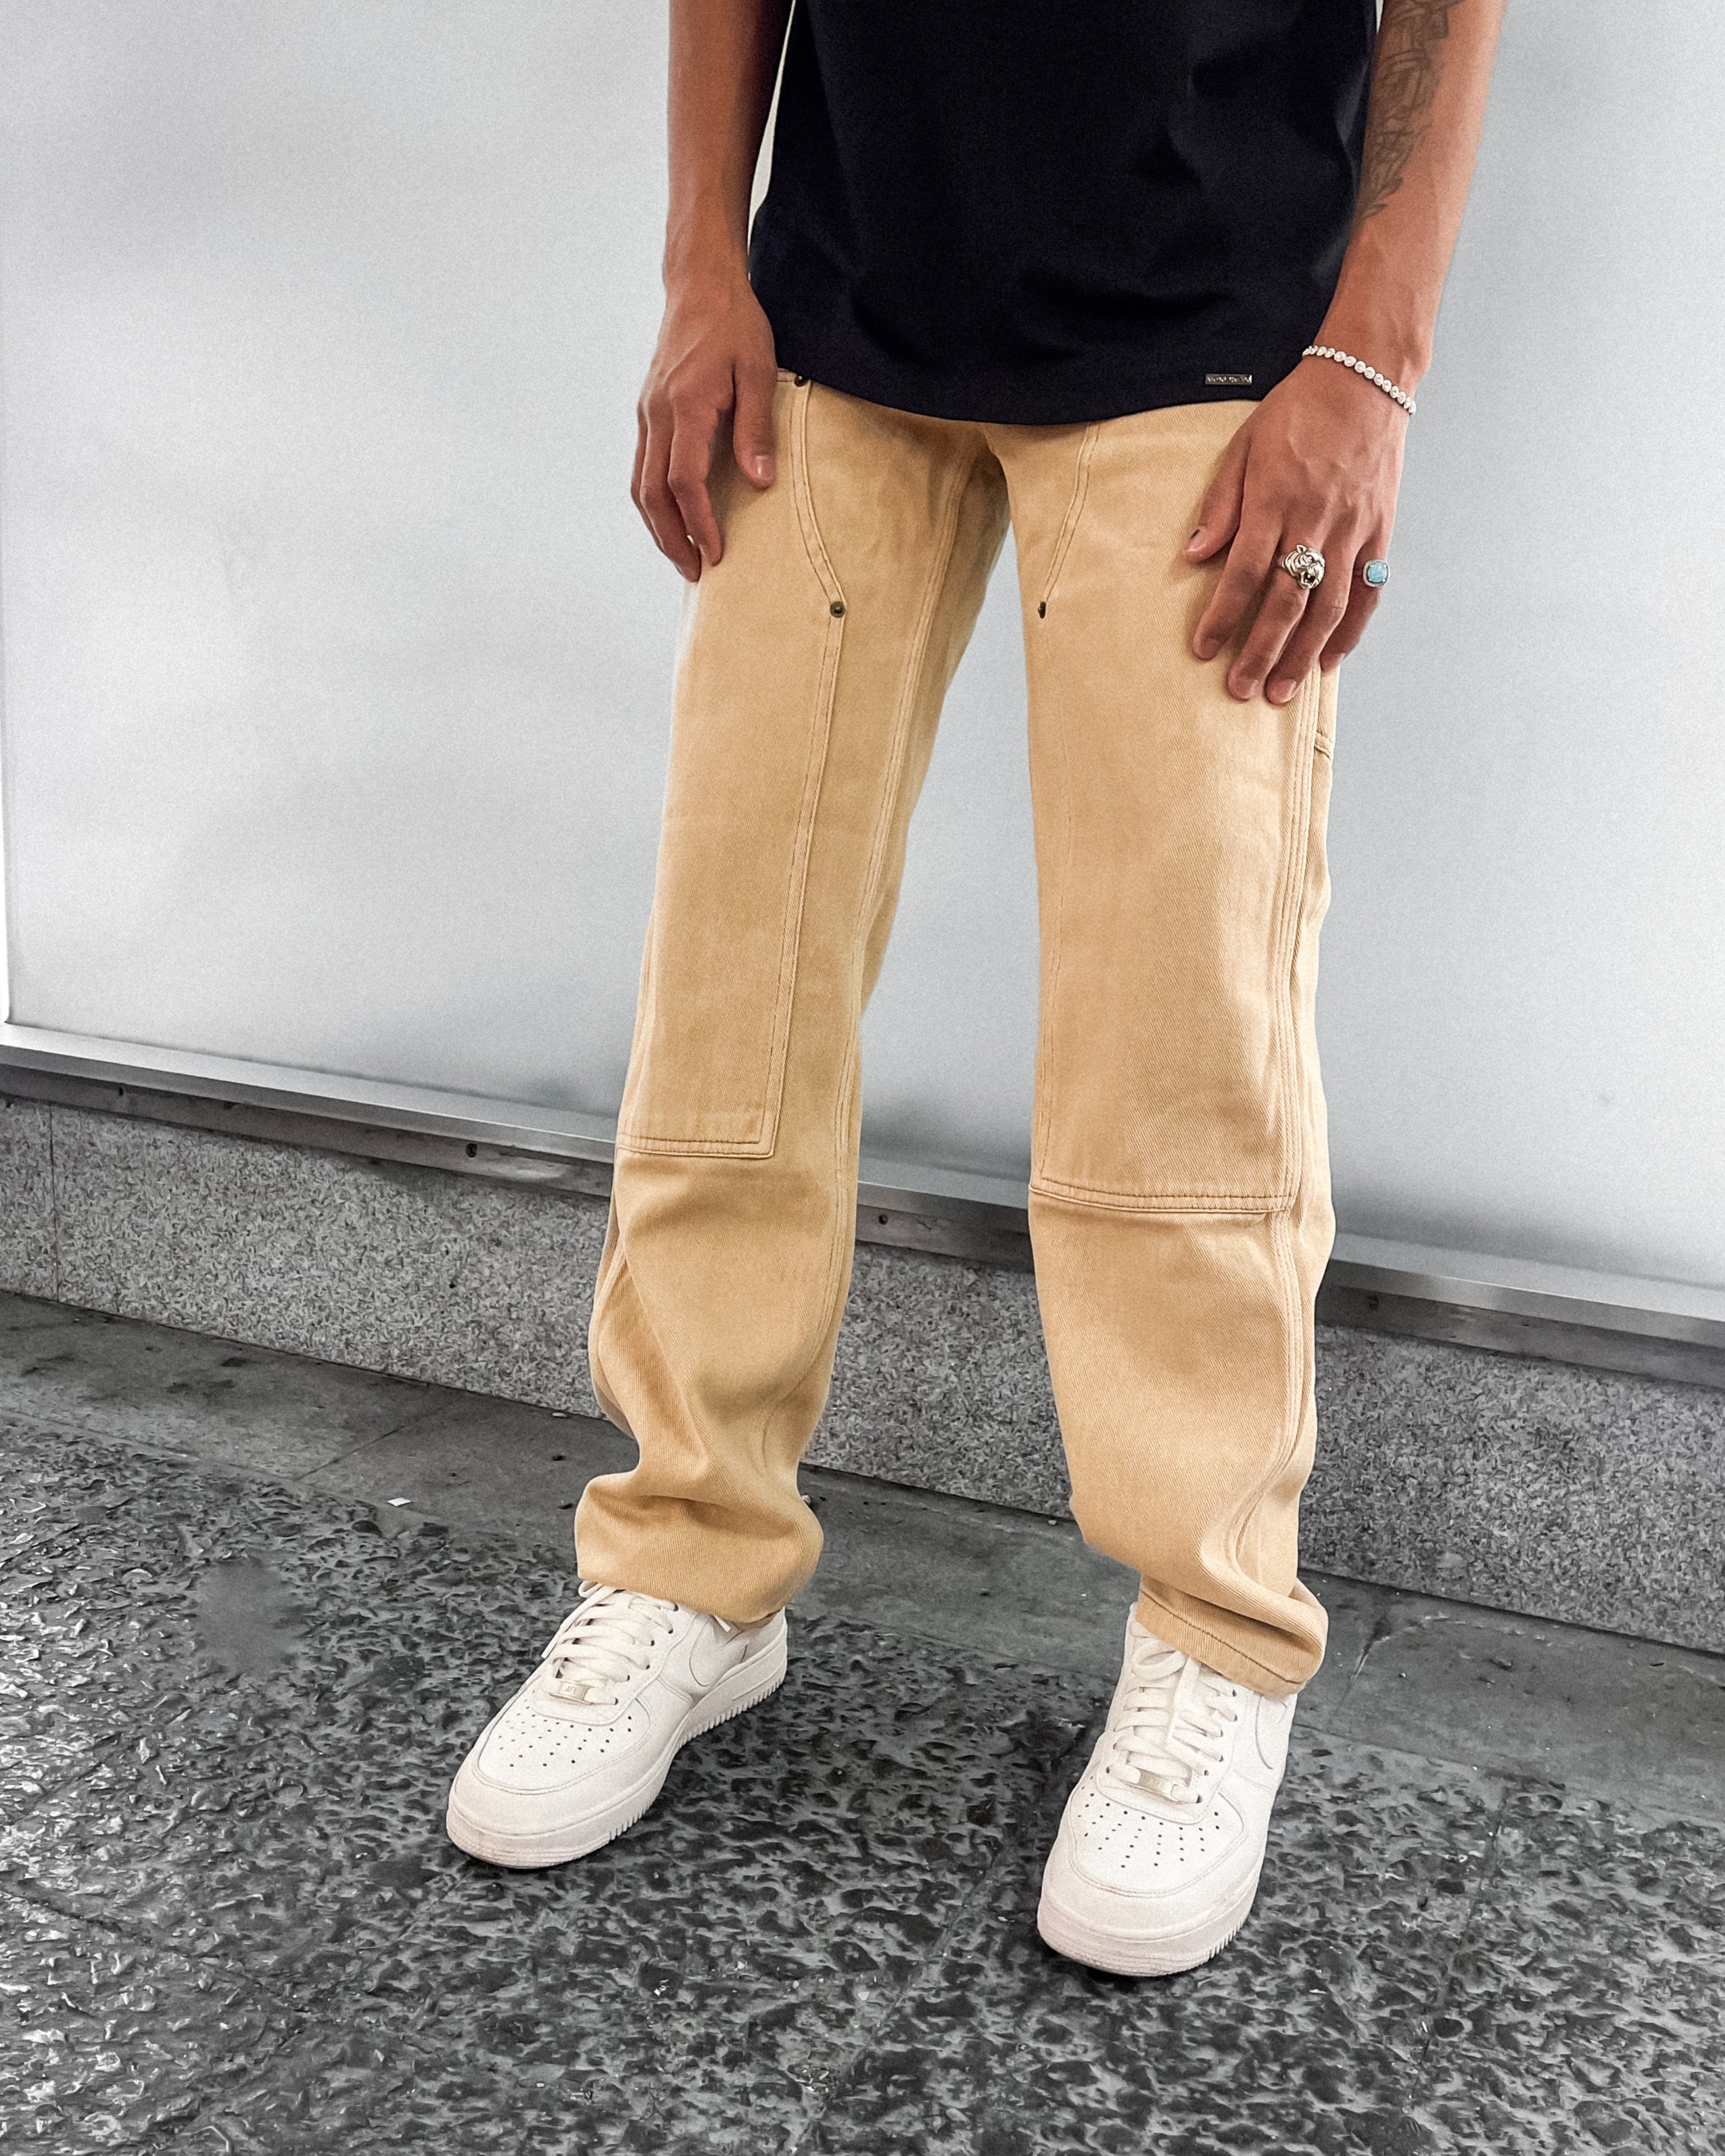 CARPENTER JEANS RELAXED FIT | BEIGE